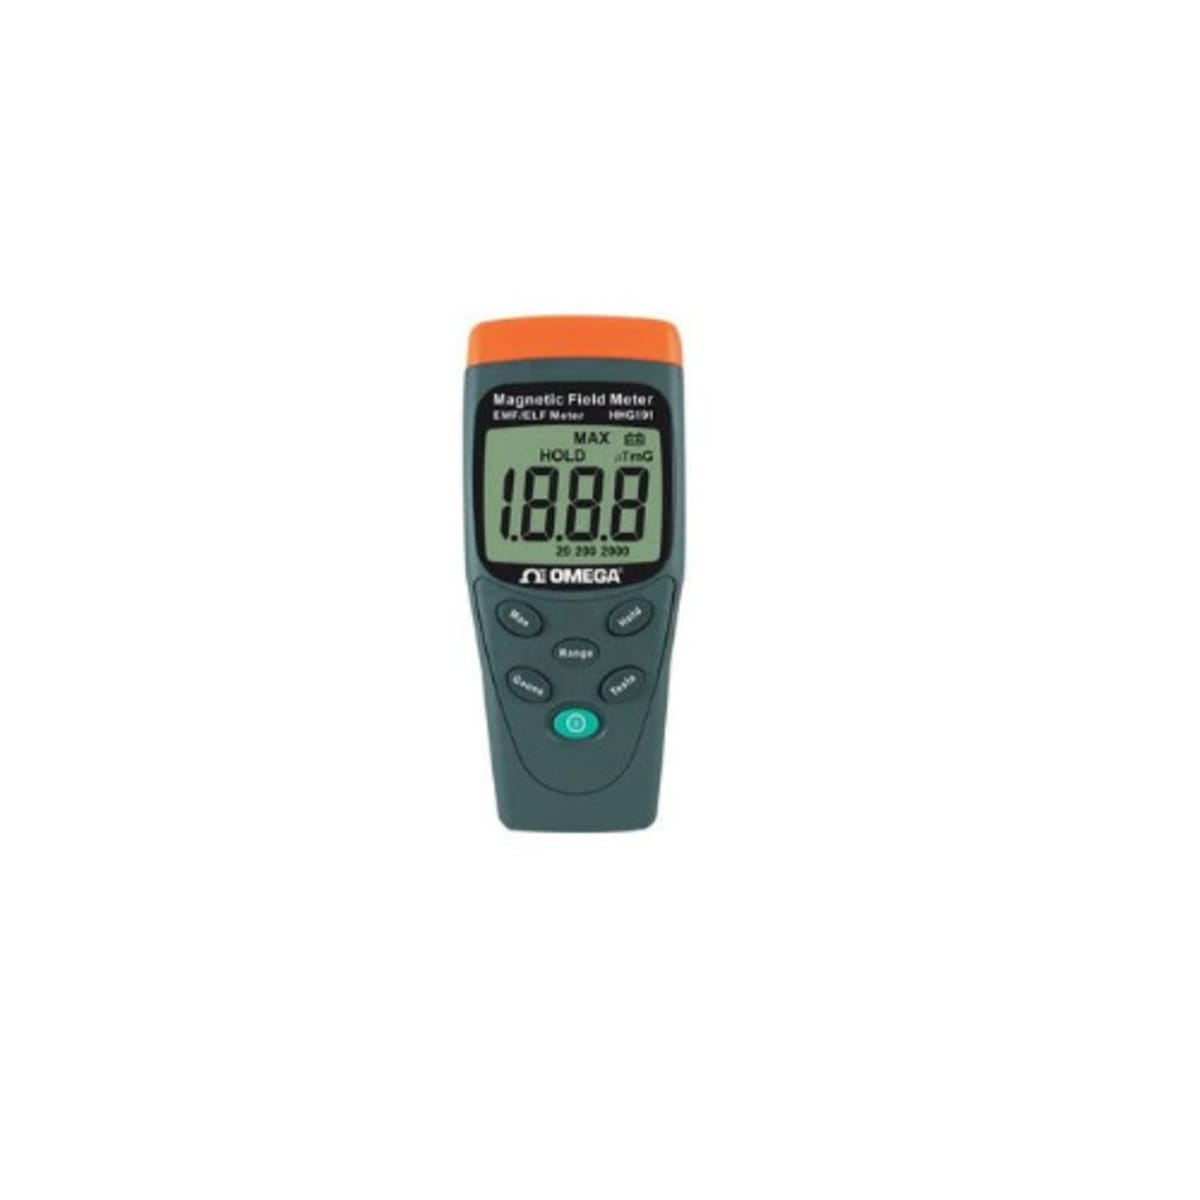 Omega Portable Magnetic Field Gauss Meter with Display